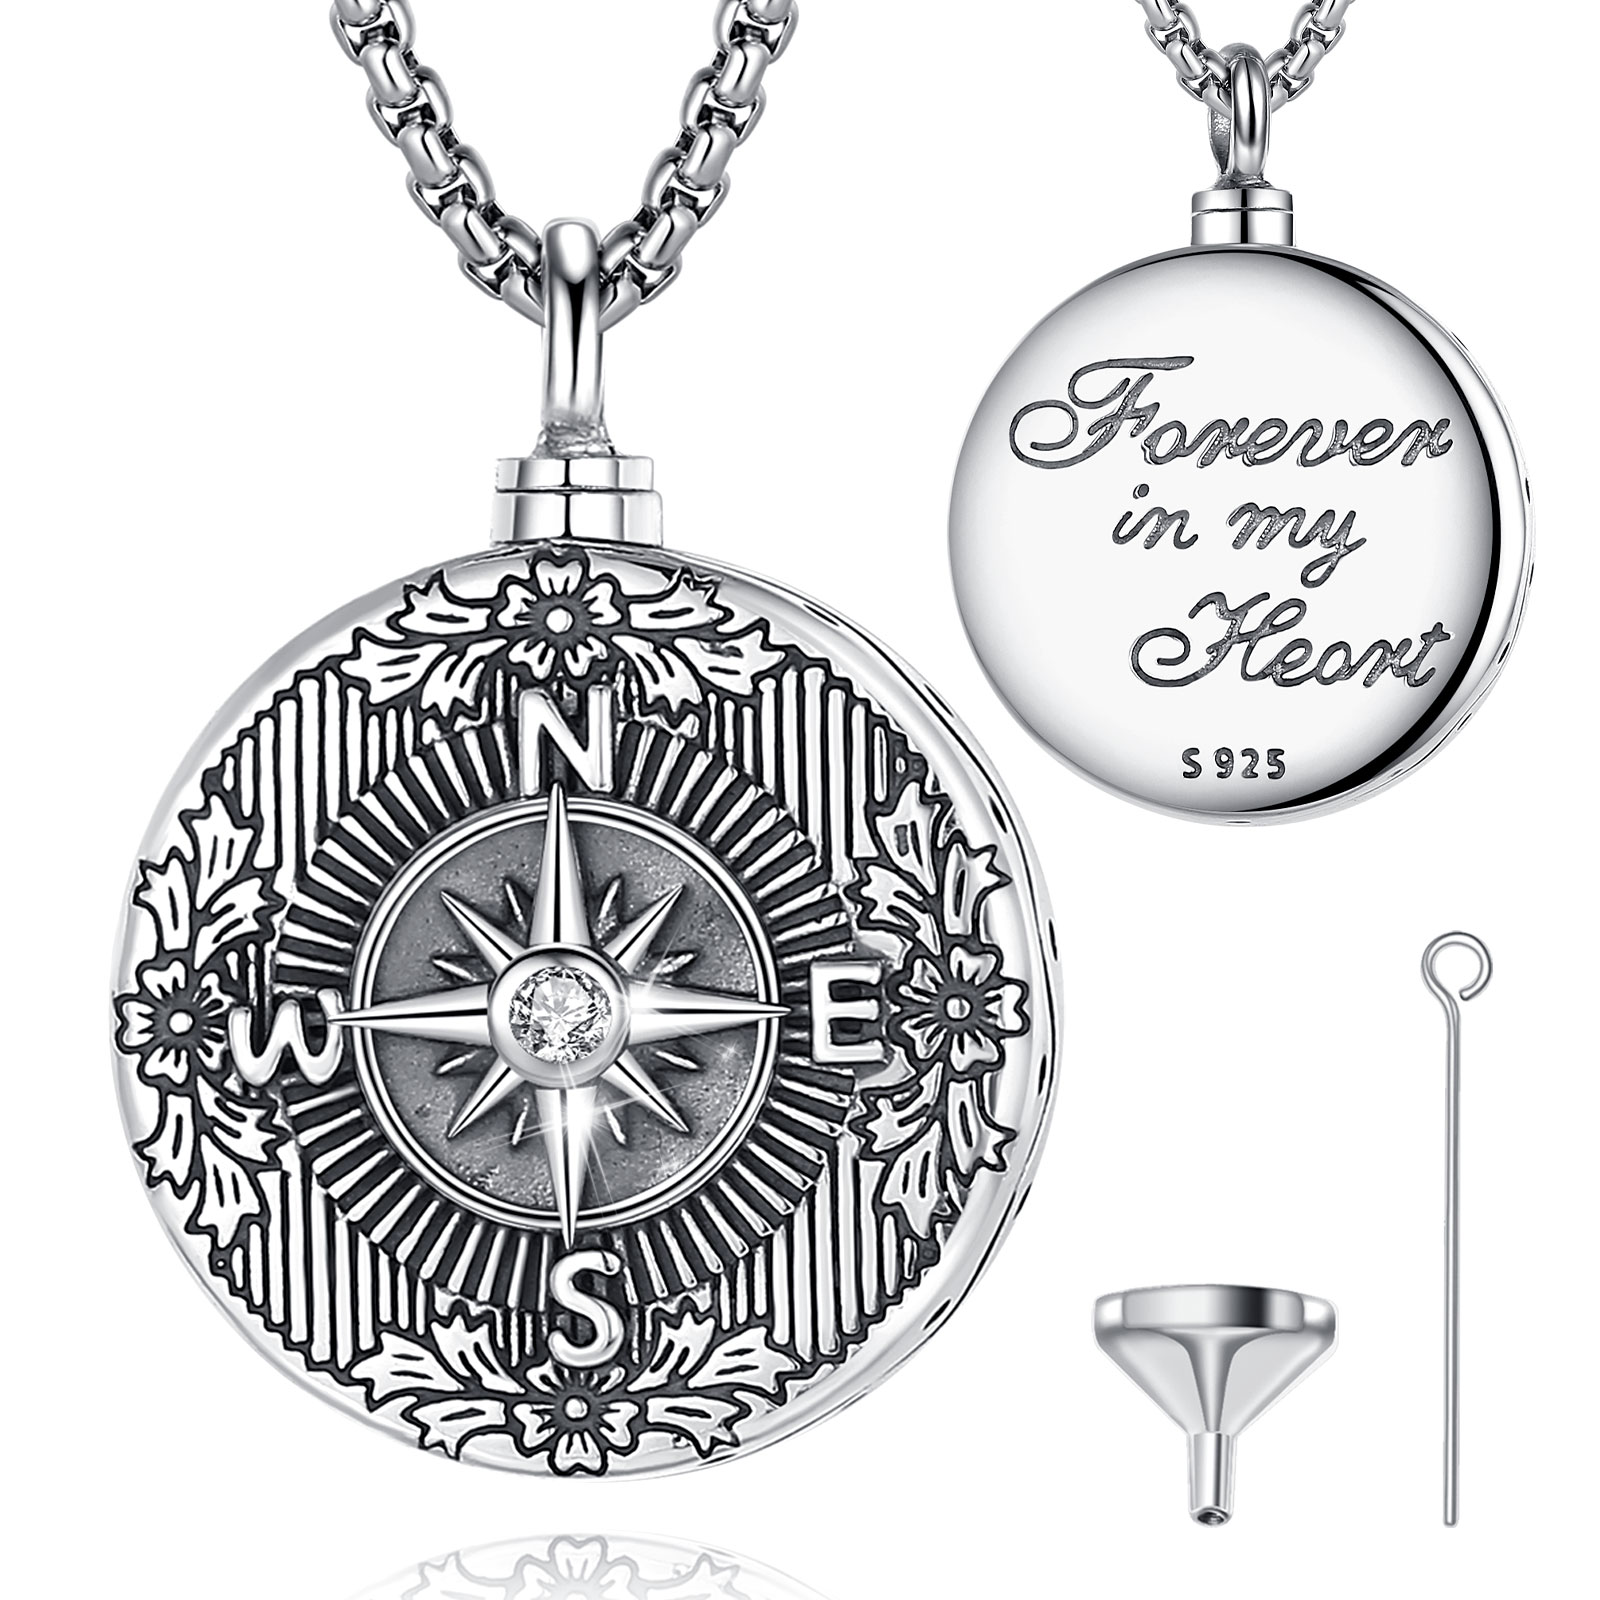 Merryshine High Quality 925 Sterling Silver Vintage Compass Design Cremation Jewelry Urn Pendant Necklace for Ashes